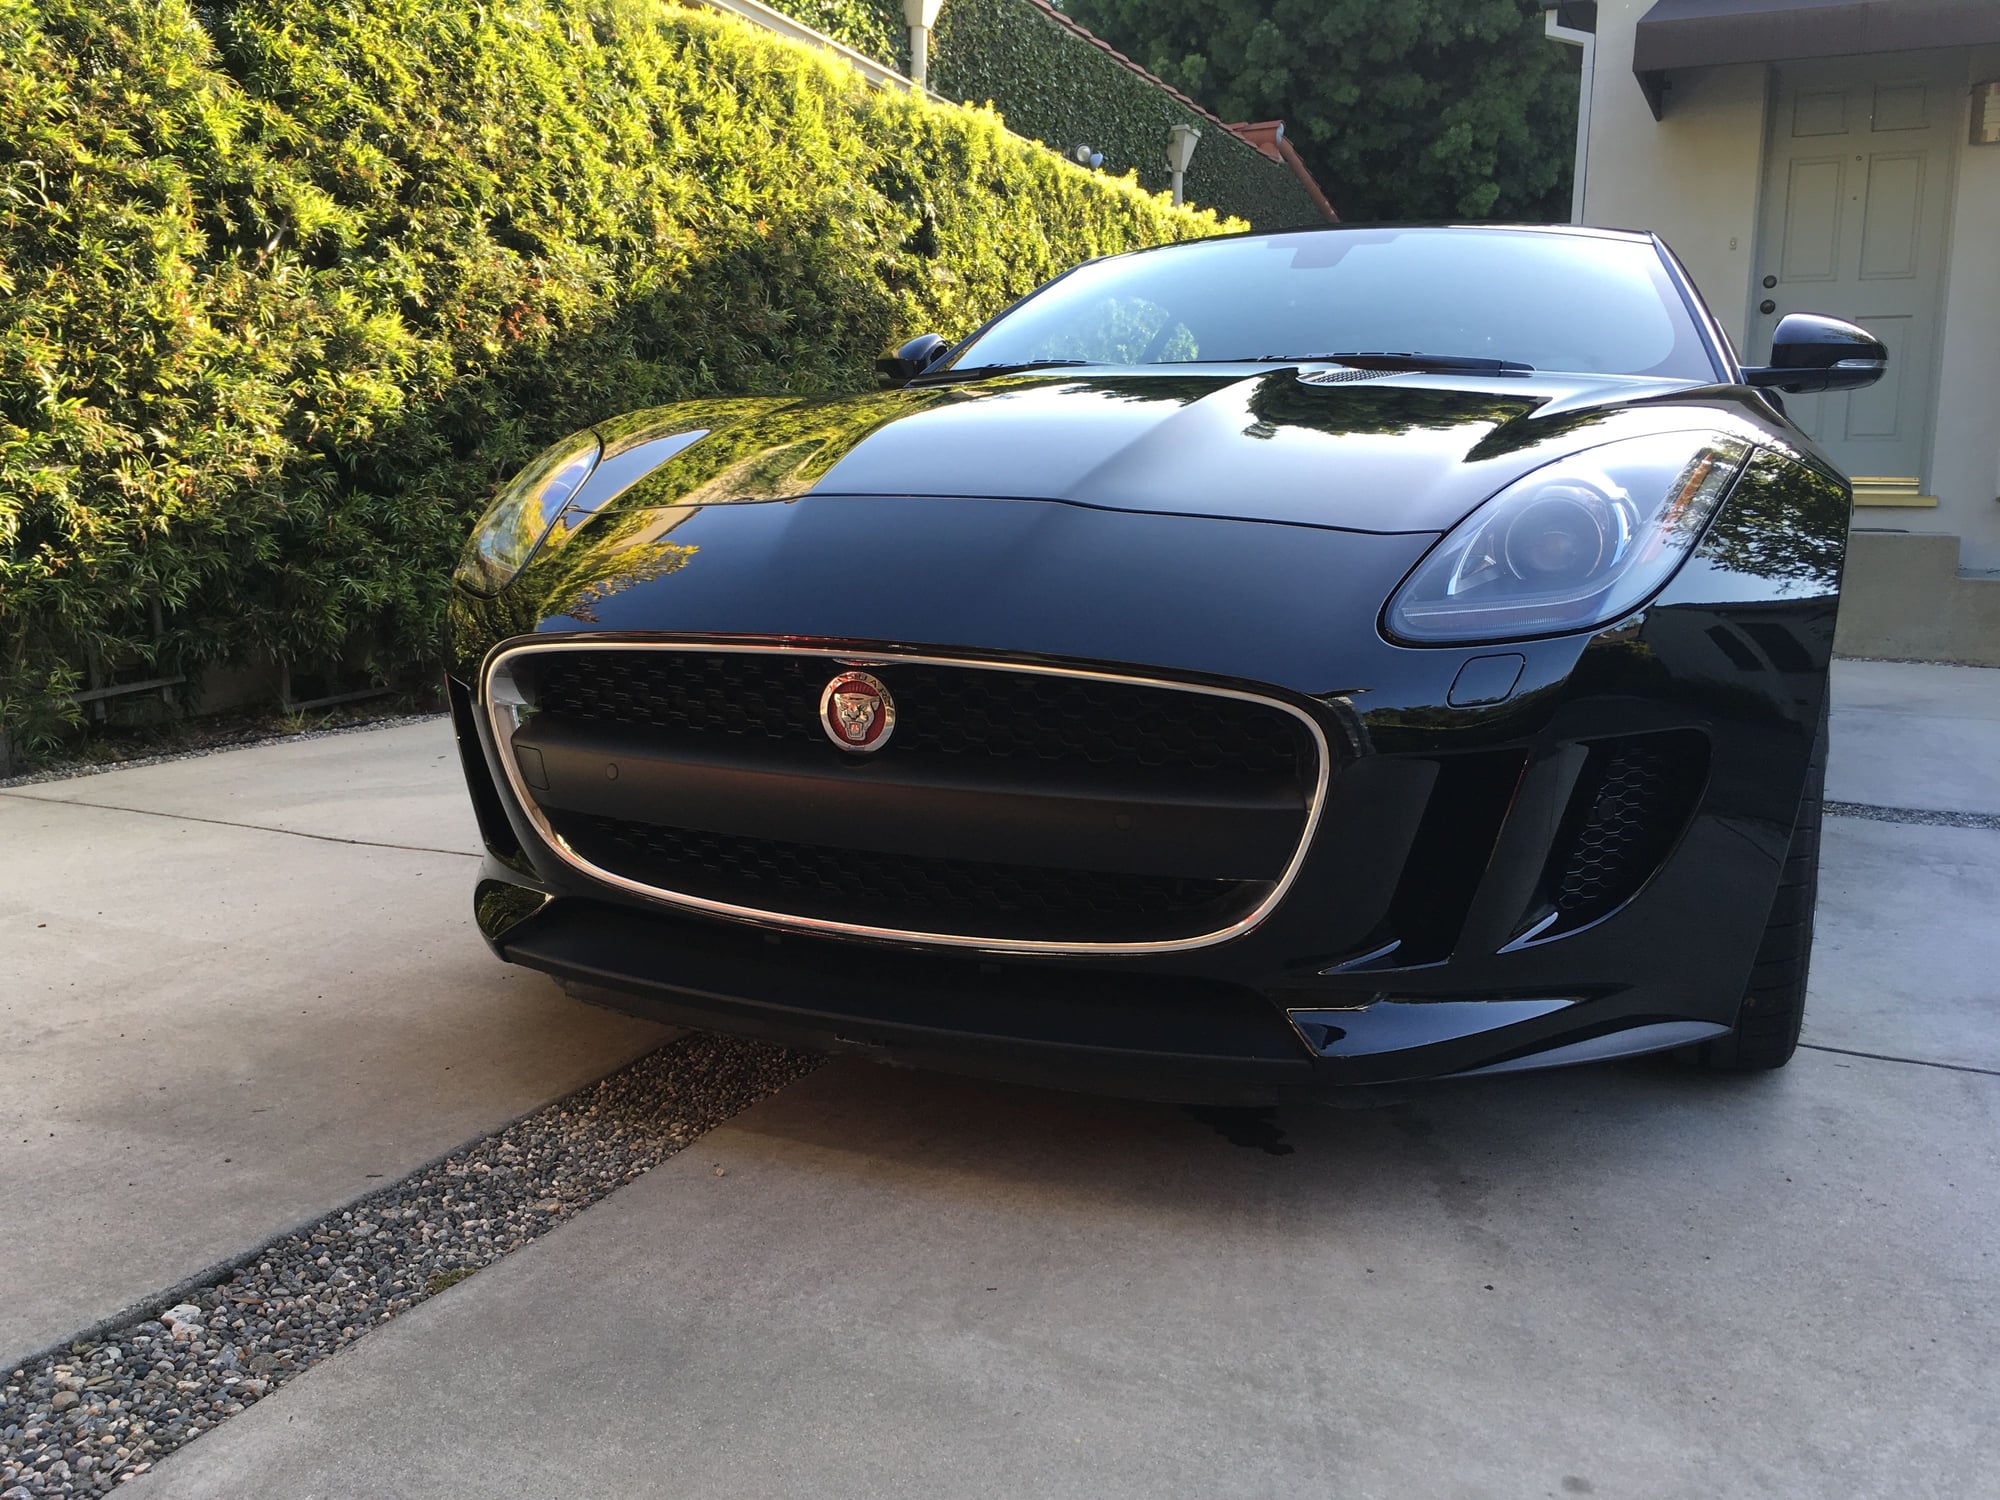 2015 Jaguar F-Type - 2015 F-Type V6 Coupe for Sale - Used - VIN SAJWA6AT8F8K22008 - 36,250 Miles - 6 cyl - 2WD - Automatic - Coupe - Black - Pasadena, CA 91103, United States